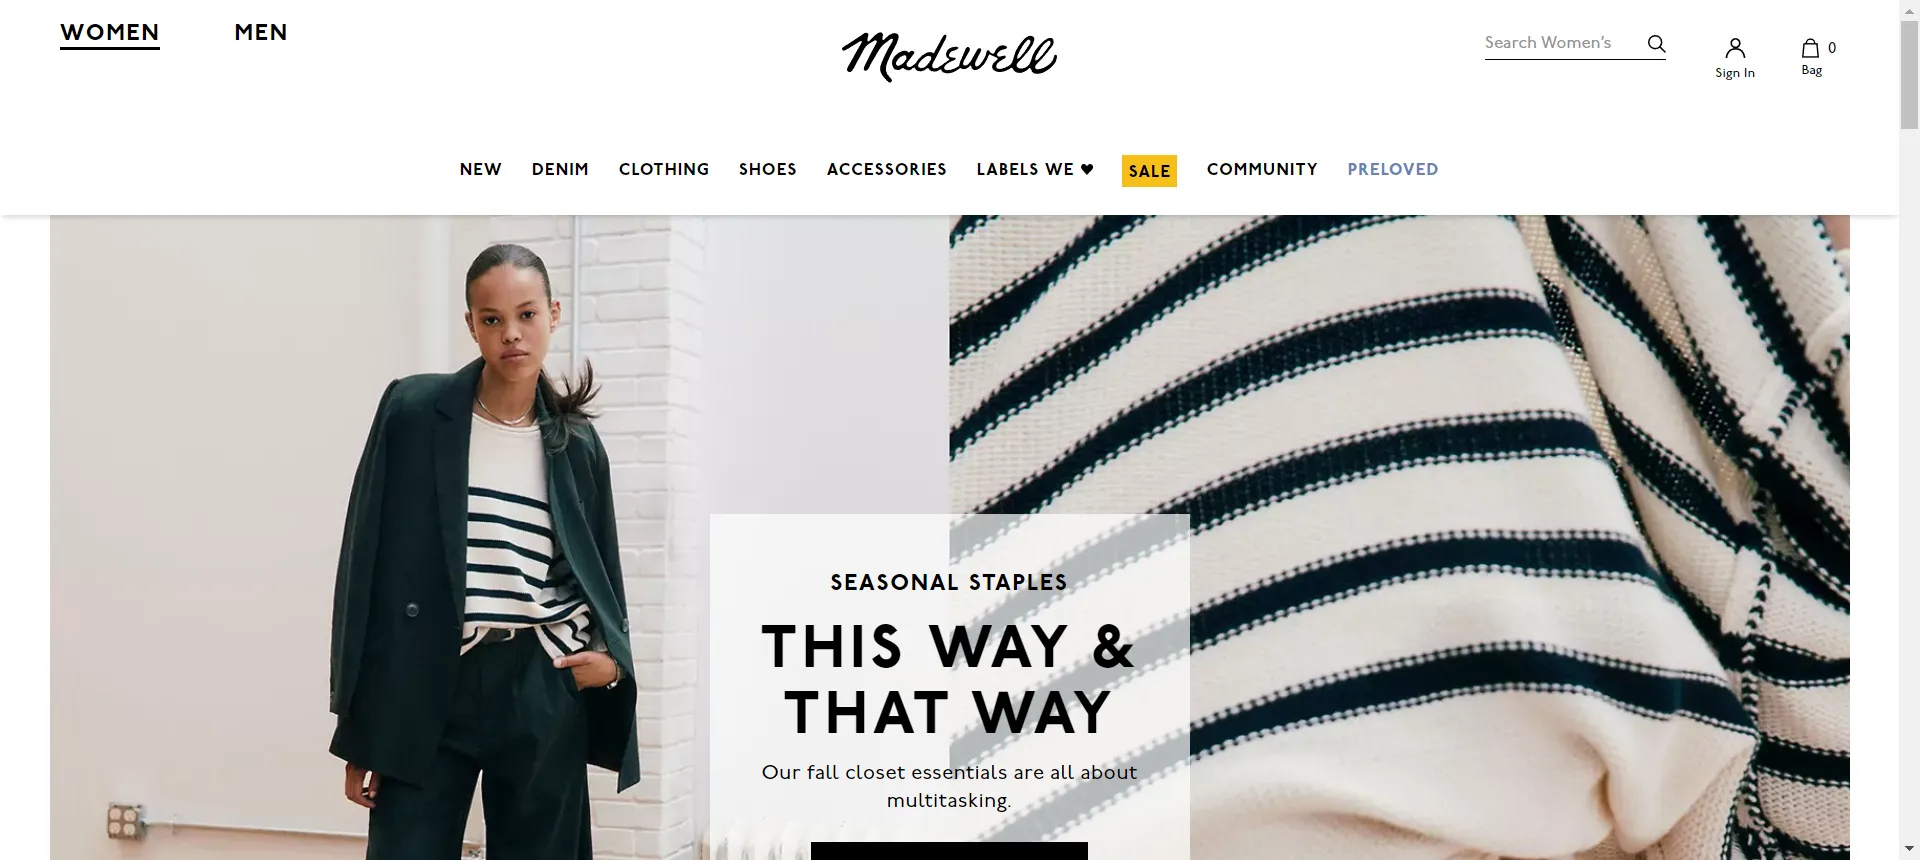 Madewell-Upselling and Cross-Selling